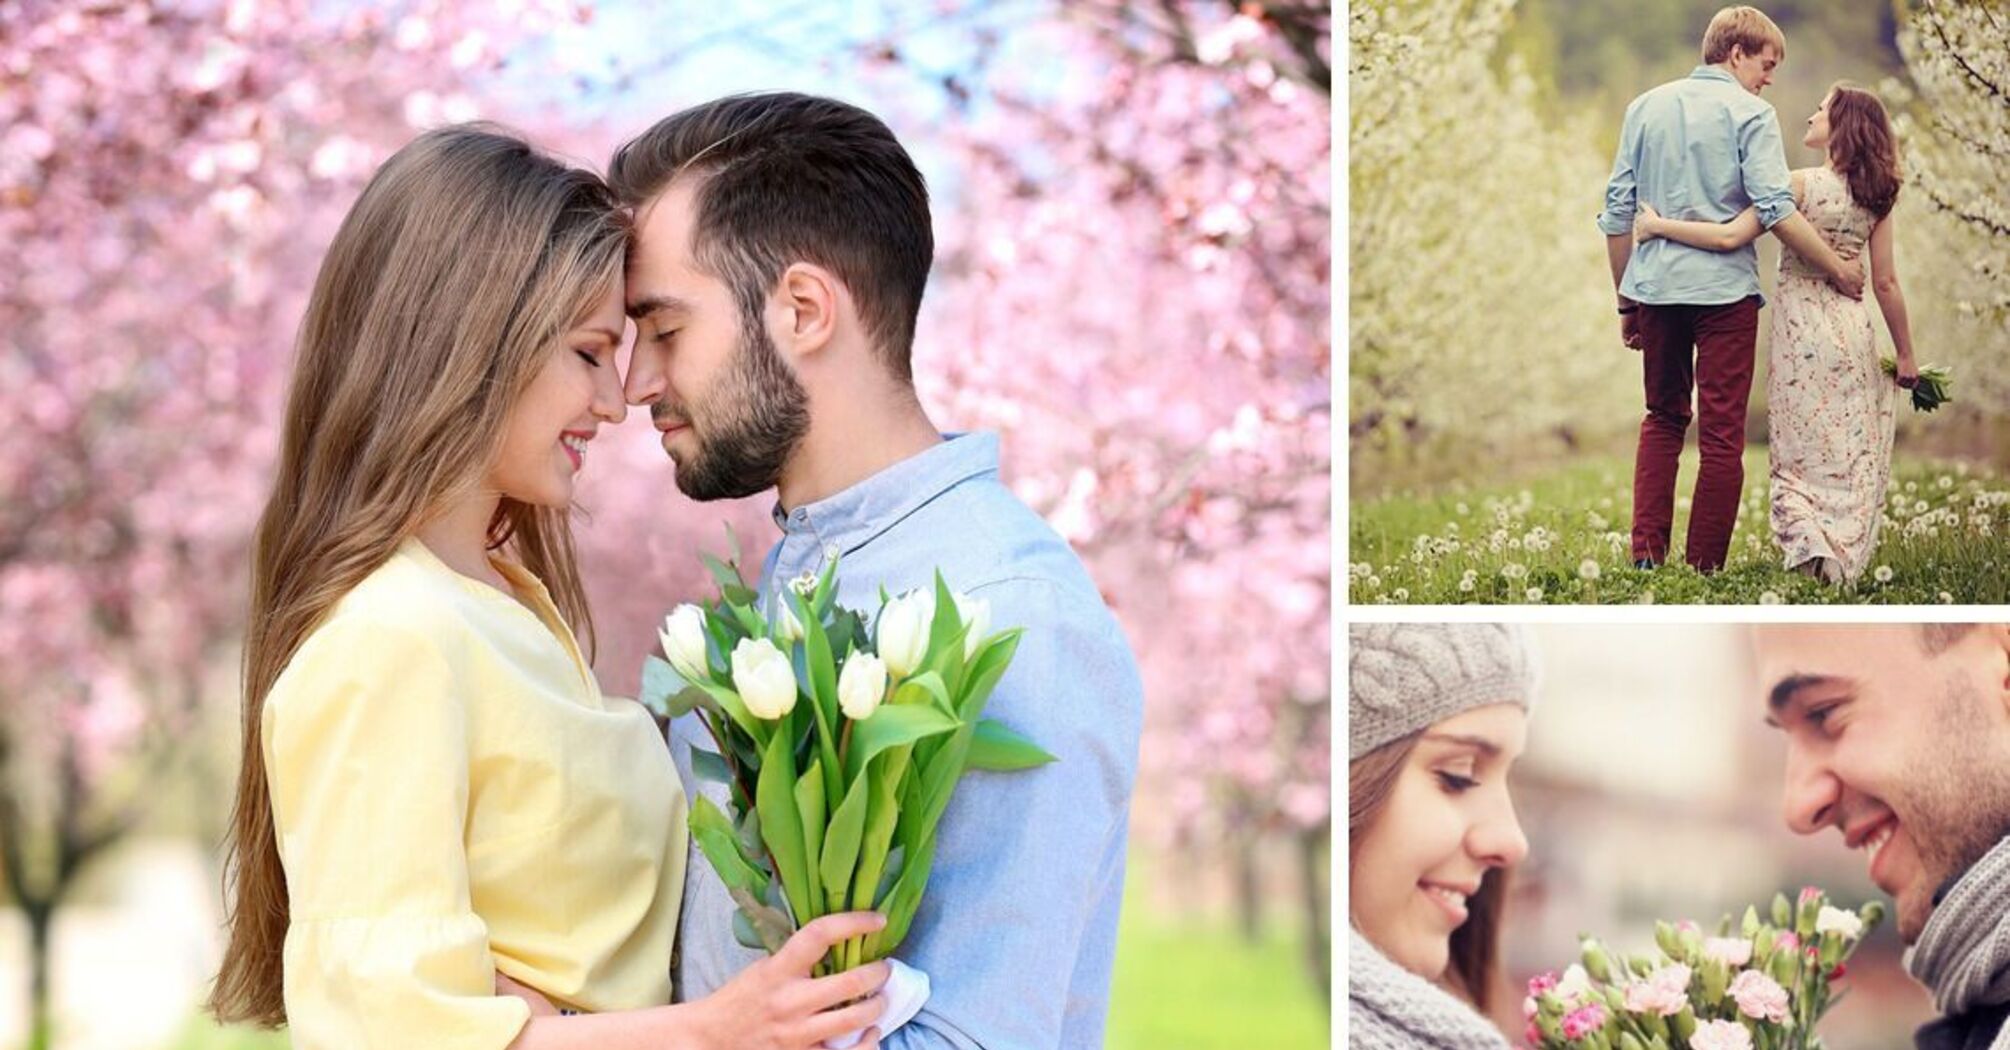 The zodiac signs that will experience real romance in spring are named: They will be very happy